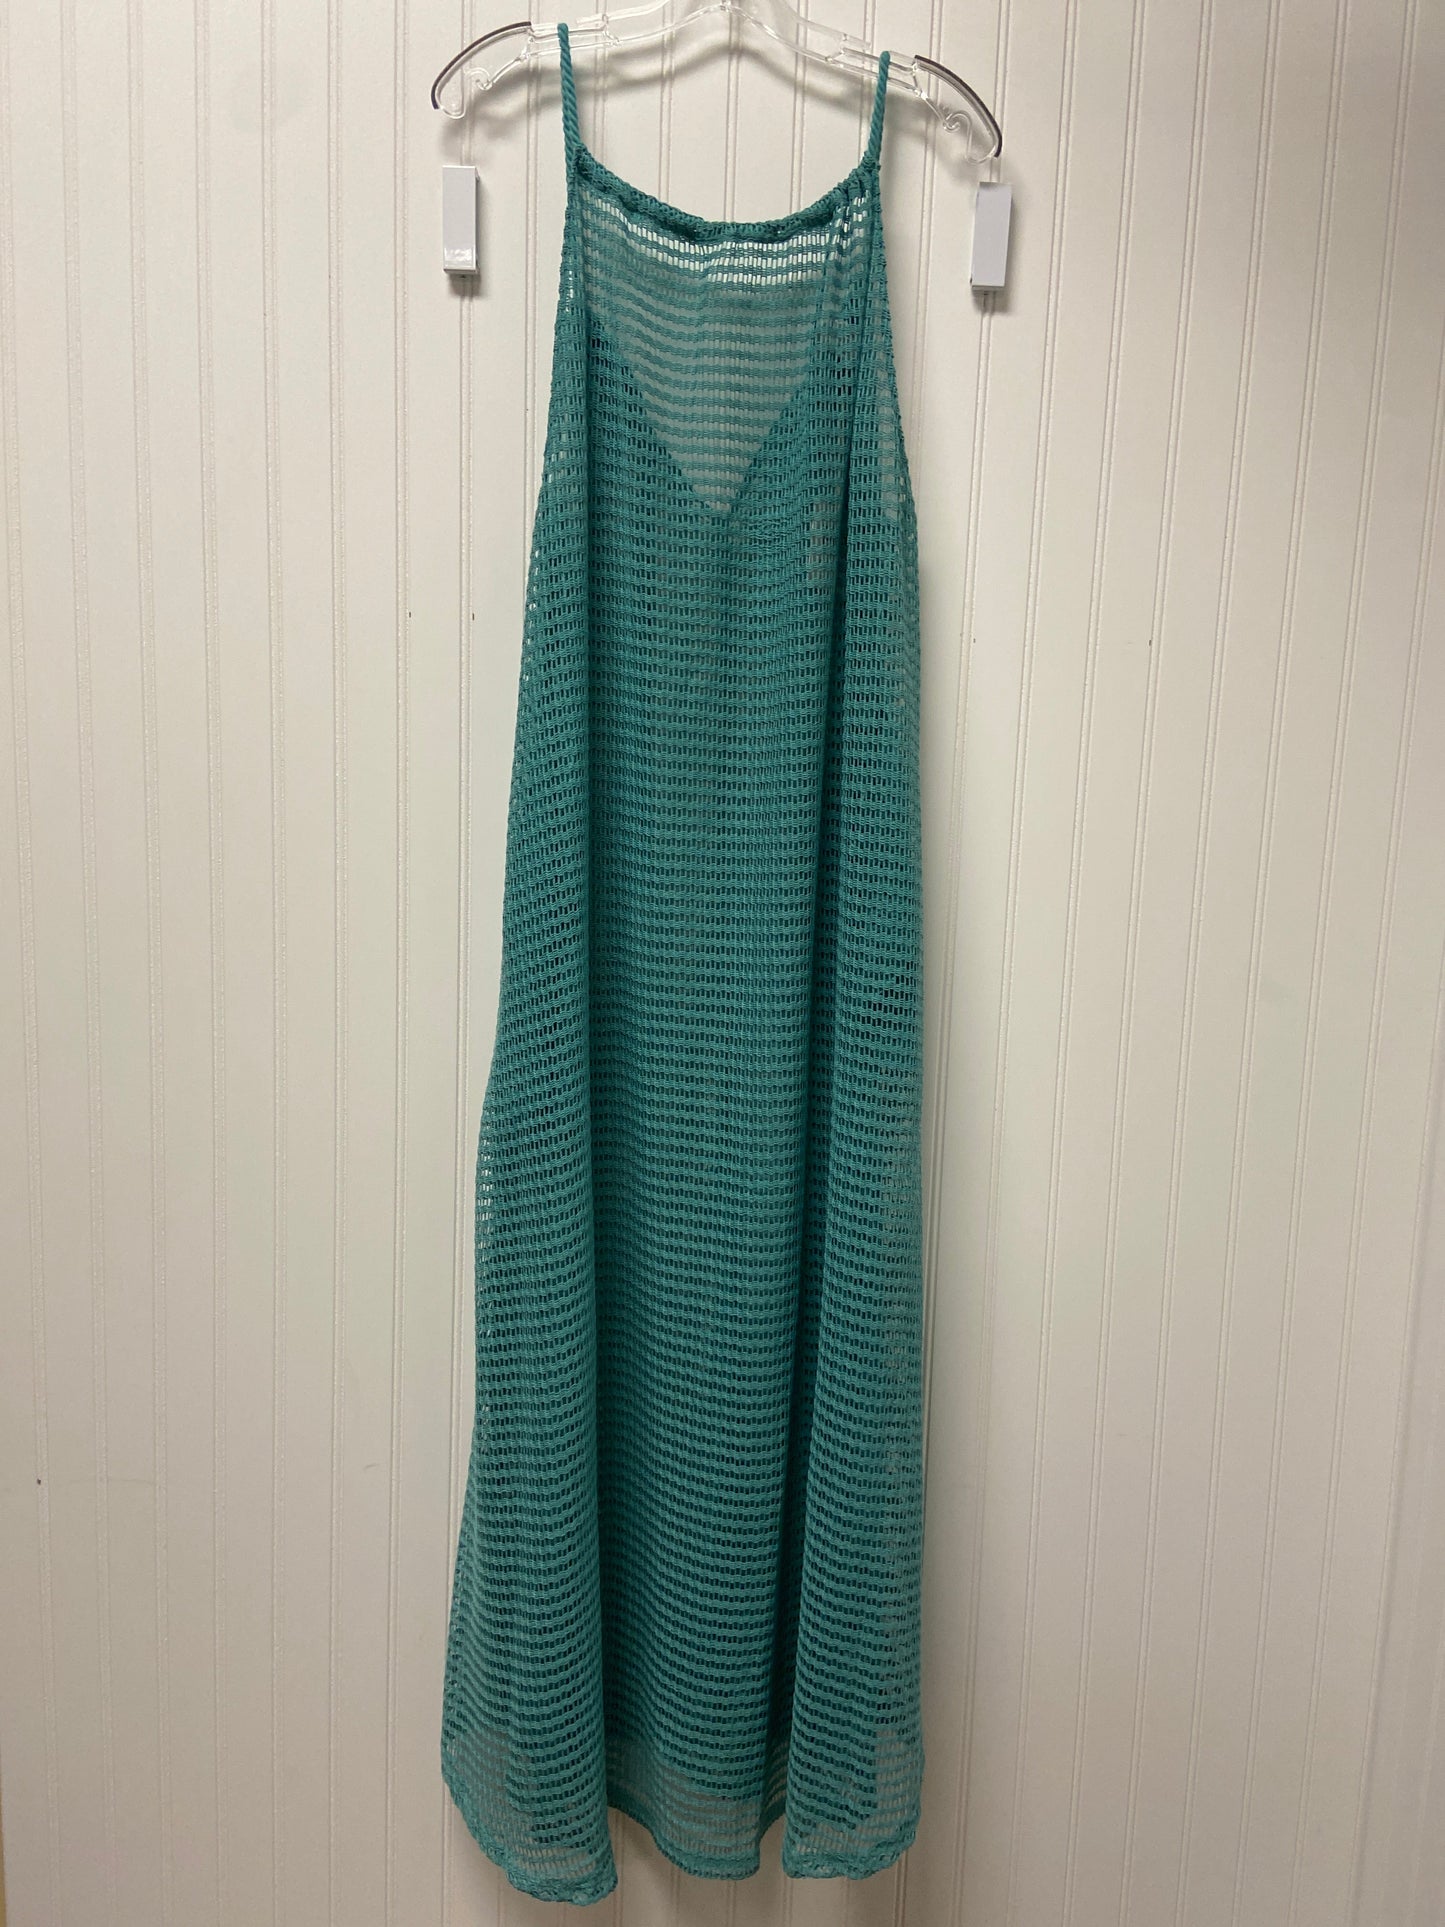 Teal Swimwear Cover-up Haute Hippie, Size Xl